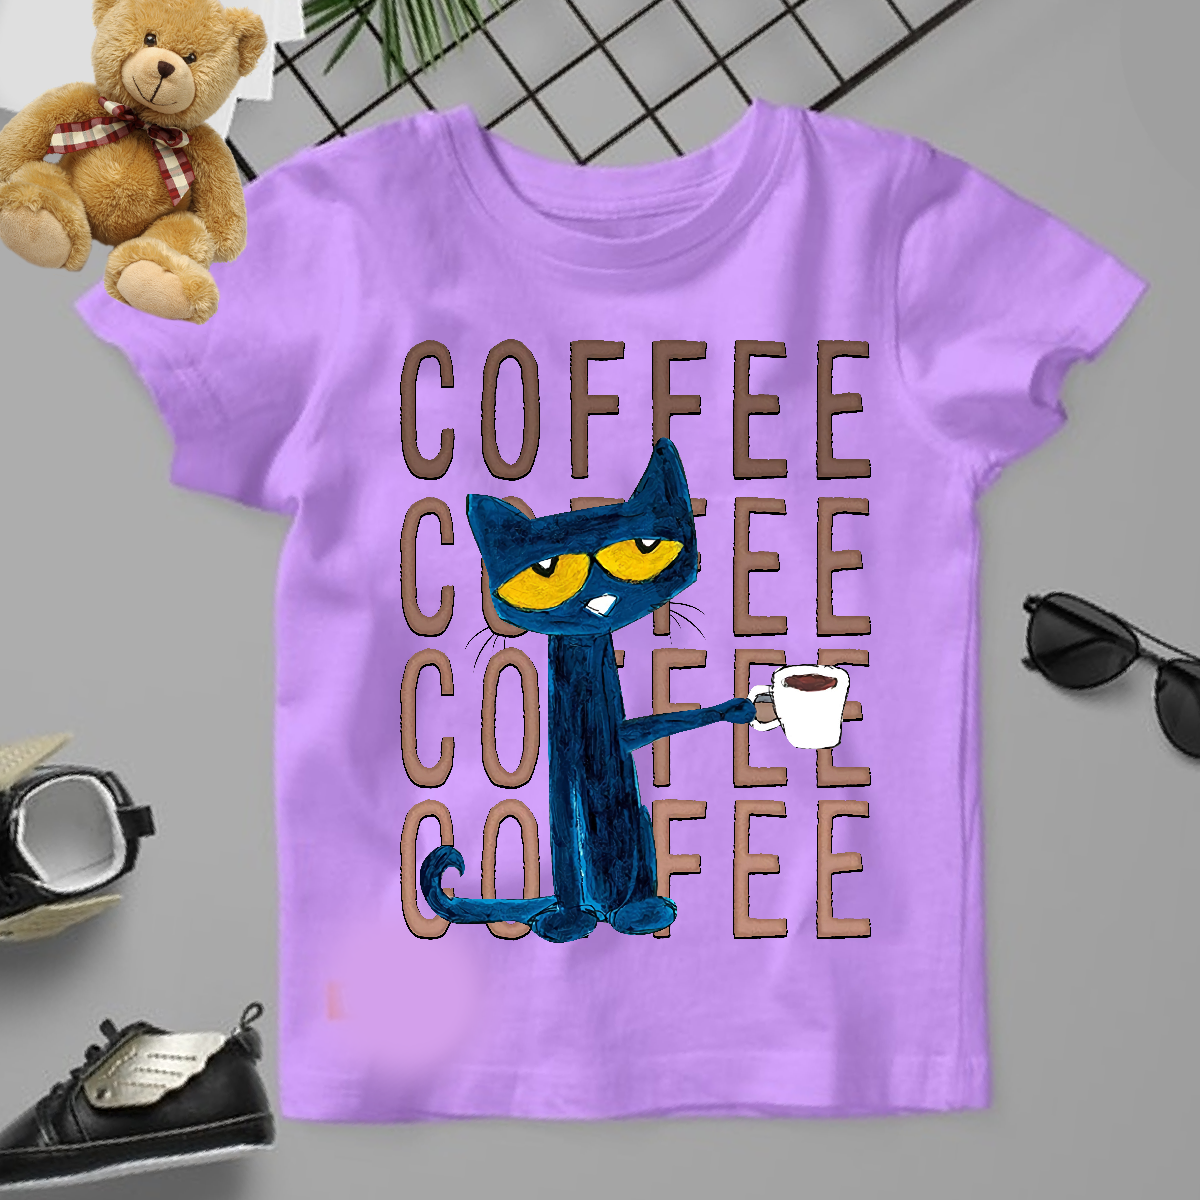 Pete The Cat Coffee Shirt, Pete The Cat Birthday Shirt, Book Are Groovy Shirt, If You Want To Be Cool Just Be You shirt, cat lovers tee